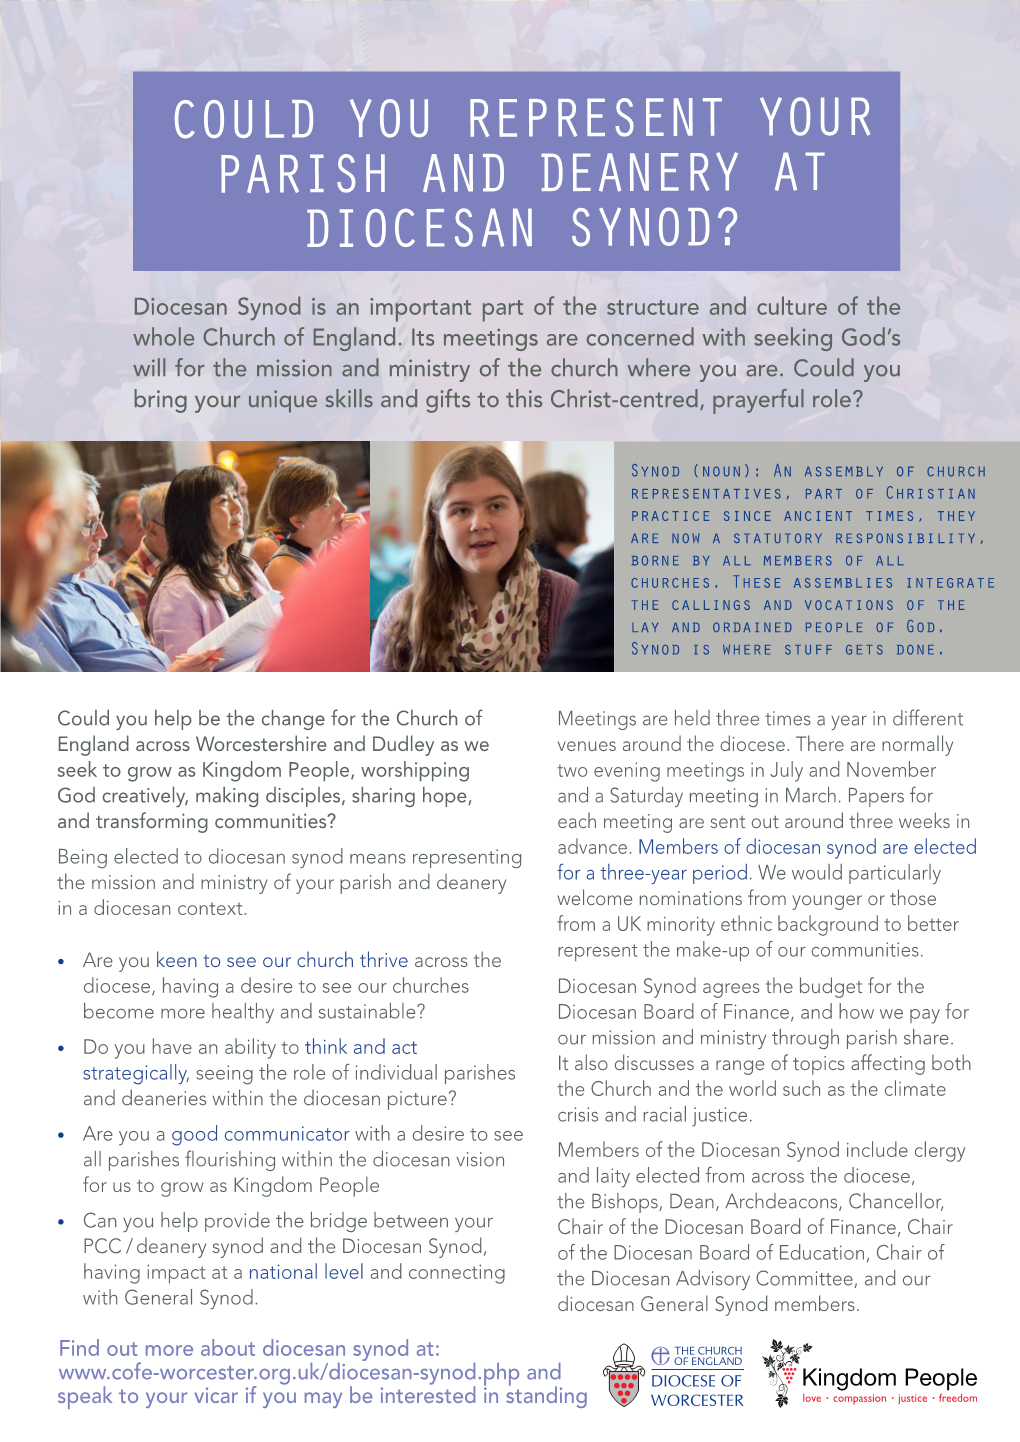 Could You Represent Your Parish and Deanery at Diocesan Synod?